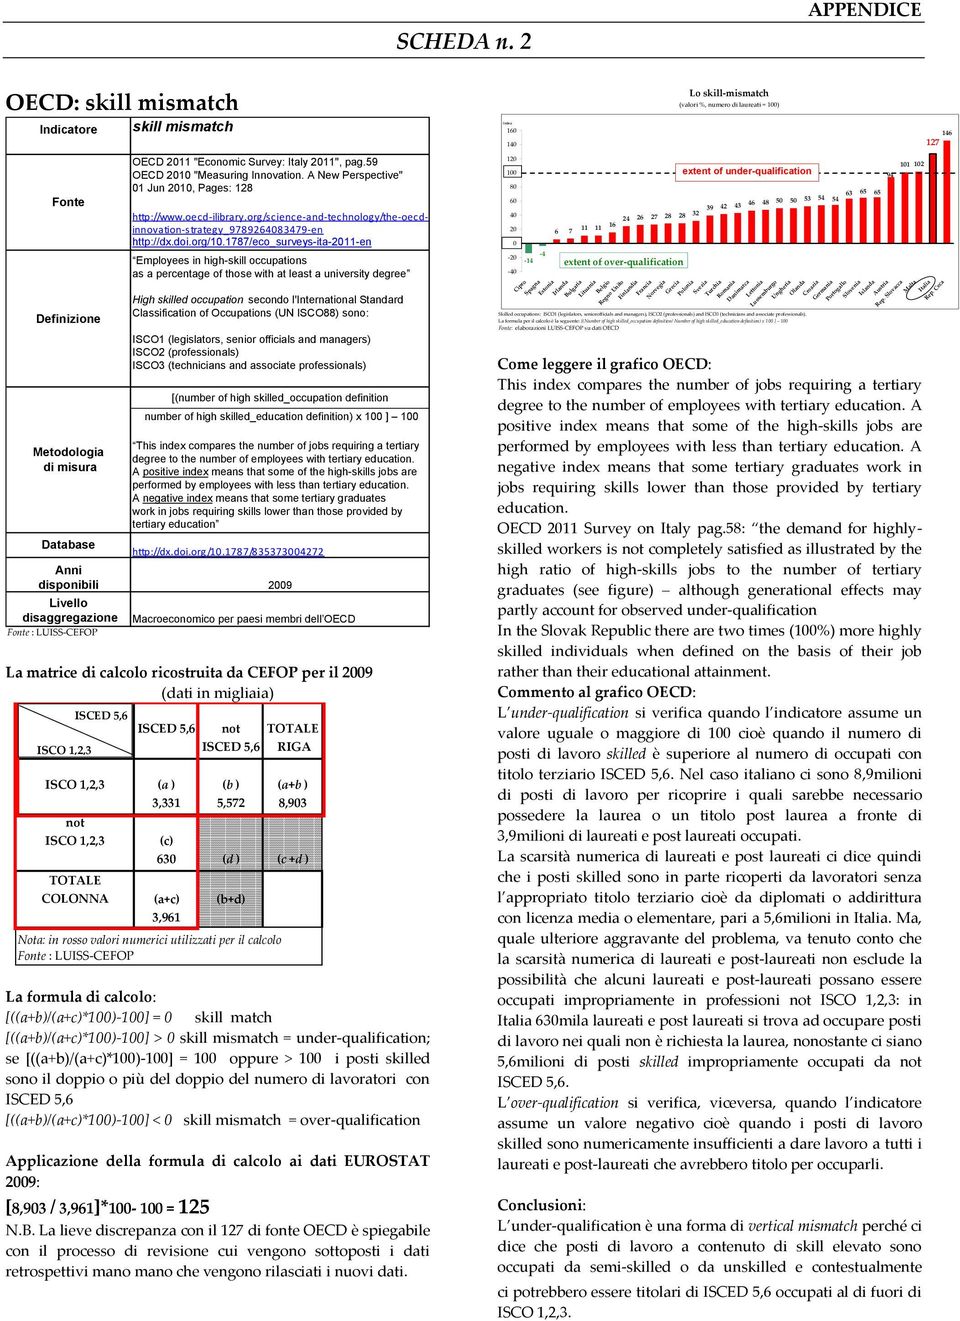 Italy 2011", pag.59 OECD 2010 "Measuring Innovation. A New Perspective" 01 Jun 2010, Pages: 128 http://www.oecd-ilibrary.